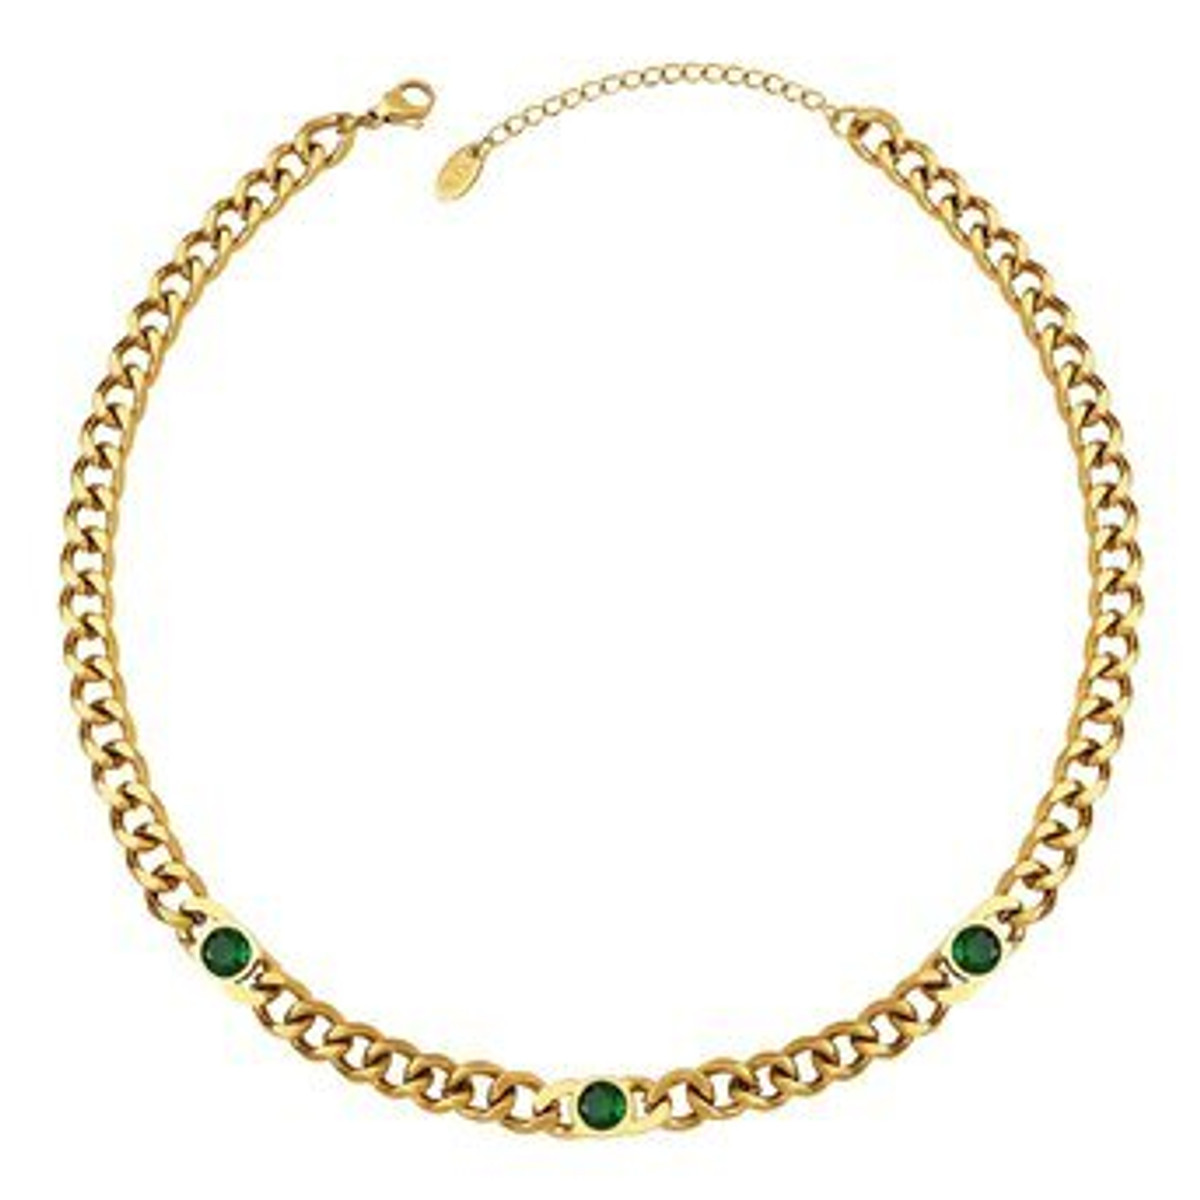 Lūceō Perfection, 18K gold plated Stainless steel necklace